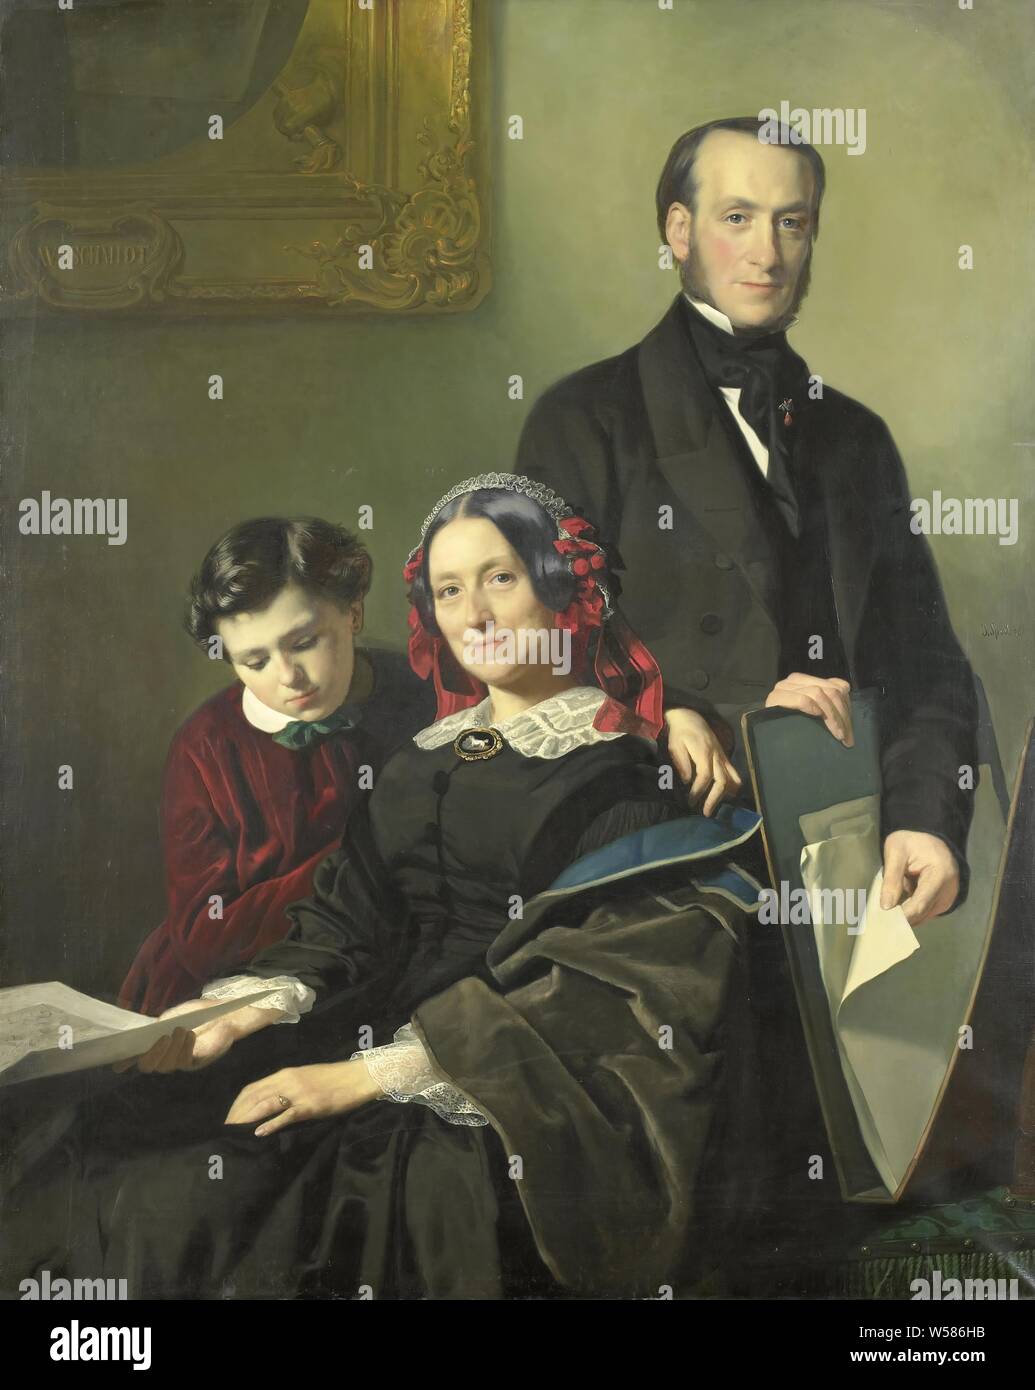 Mrs A J Schmidt-Keiser, widow of the painter Willem Hendrik Schmidt (1809-49), the teacher of Jacob Spoel, with her brother J N Keiser and her ten-year-old son, Portrait of Mrs A.J. Schmidt-Keiser, with her brother J.N. Keiser and her ten-year-old son. The woman is holding a drawing in his right hand, the man is browsing through a portfolio of drawings. On the wall an allegorical painting by W.H. Schmidt with a torch that is put out., Jacob Spoel, 1858, canvas, oil paint (paint), h 143.5 cm × w 115 cm d 5.3 cm Stock Photo